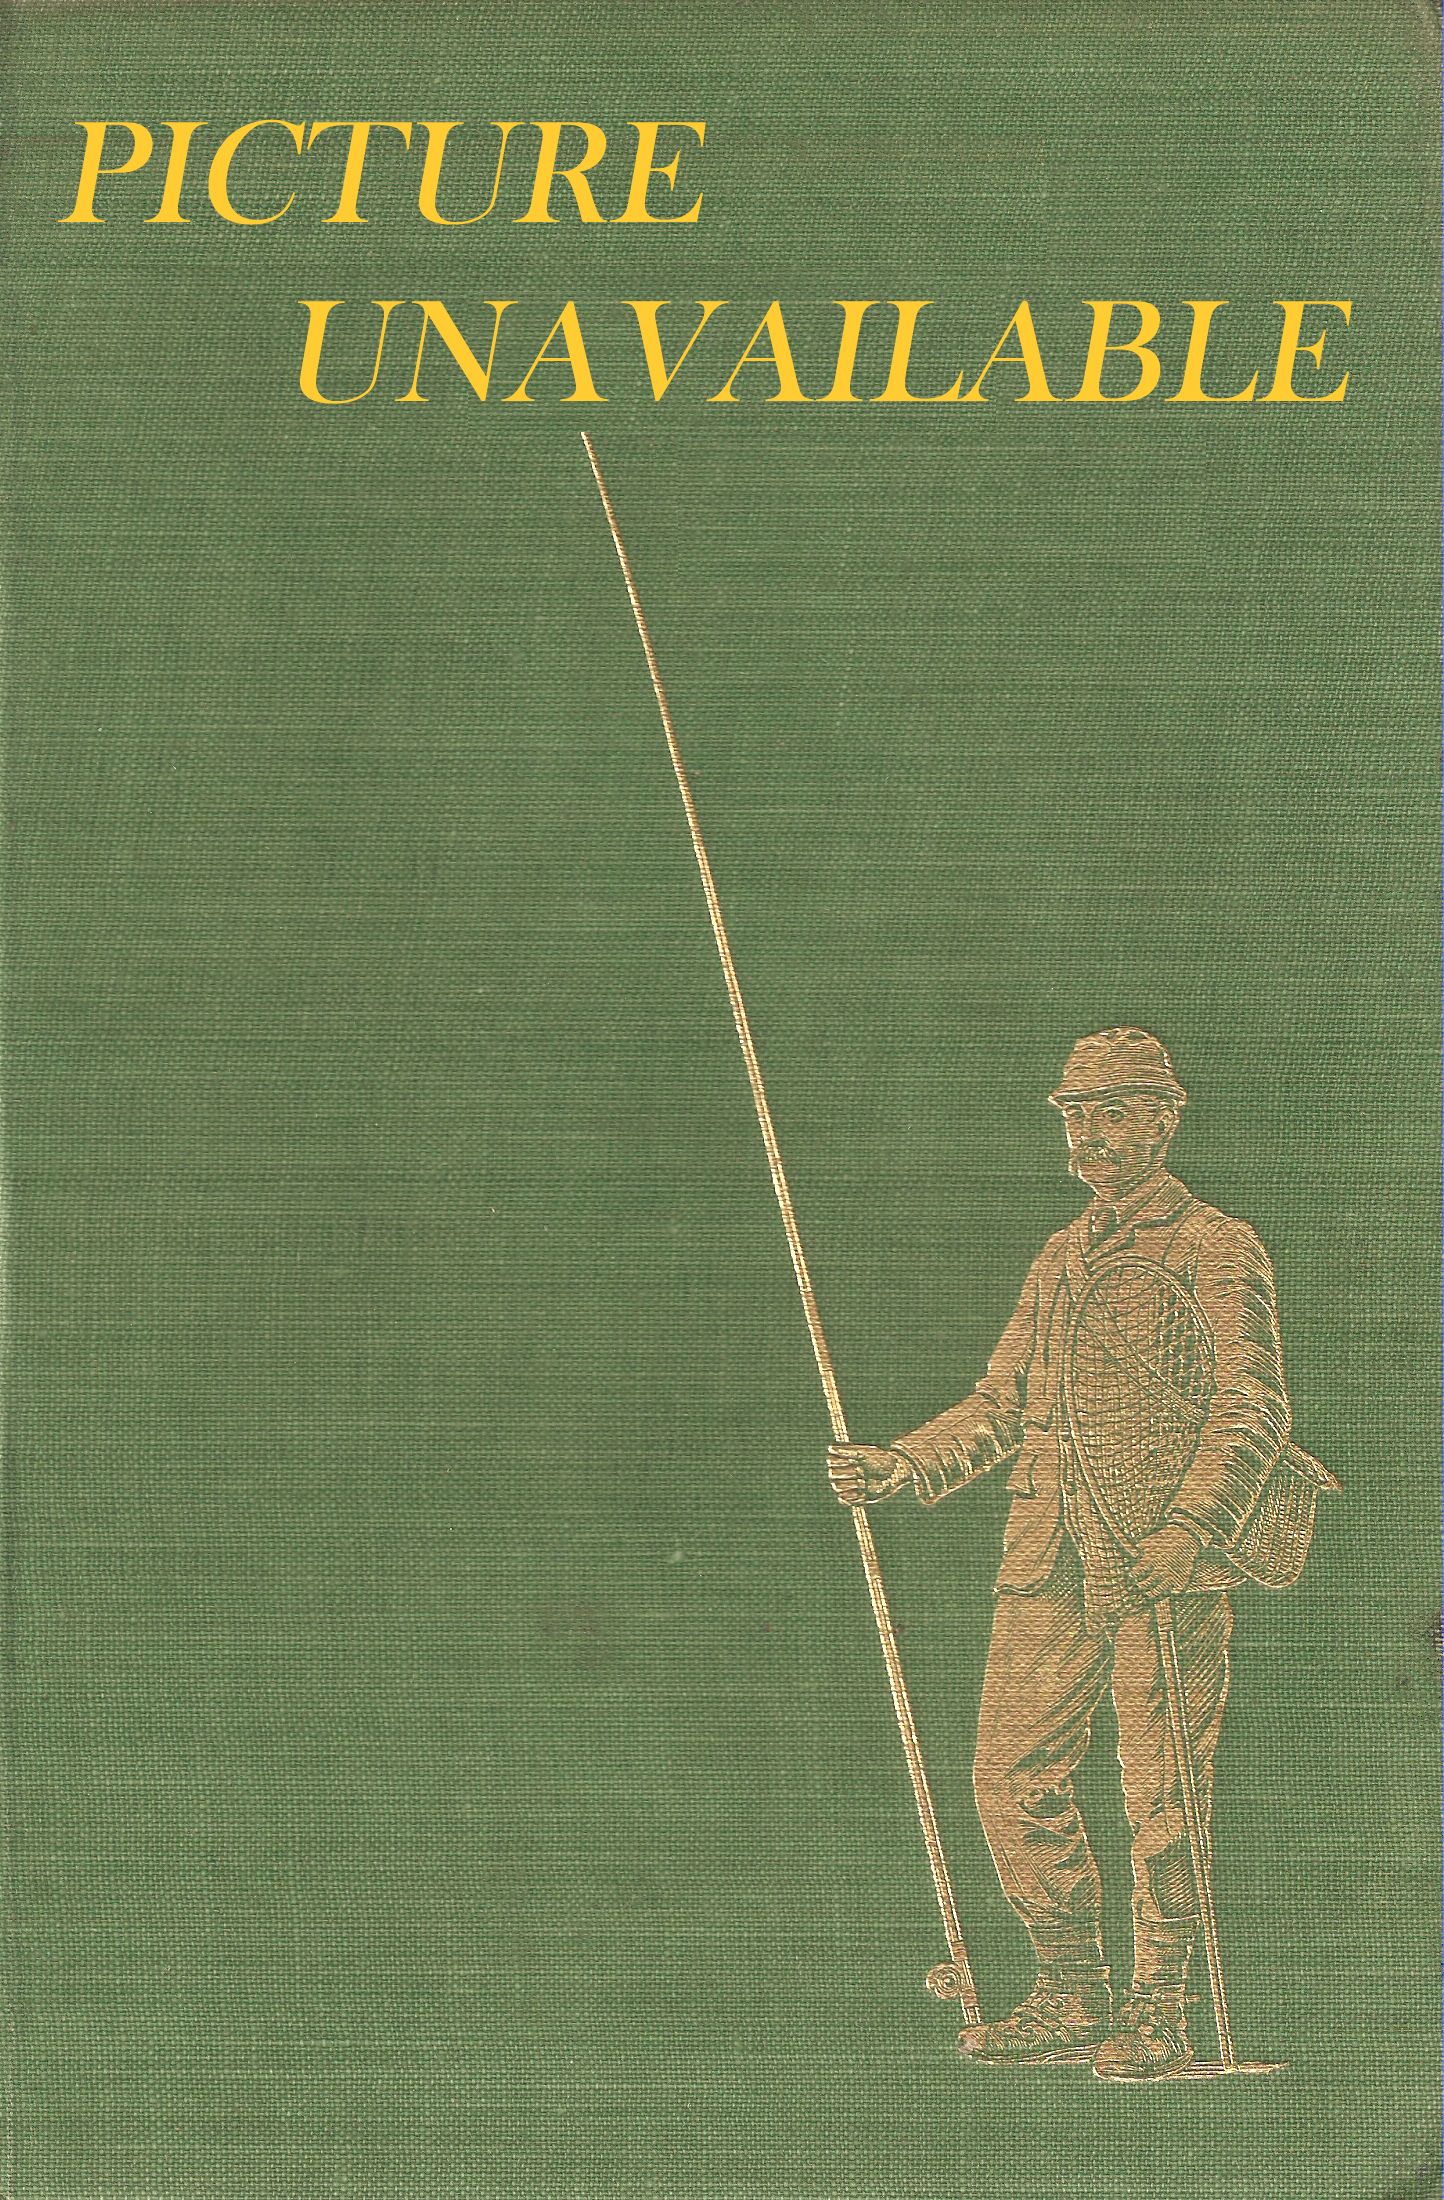 THE CONTEMPLATIVE MAN'S RECREATION: A BIBLIOGRAPHY OF BOOKS ON ANGLING AND  GAME FISH IN THE LIBRARY OF THE UNIVERSITY OF BRITISH COLUMBIA. Compiled  by Susan B. Starkman and Stanley E. Read...